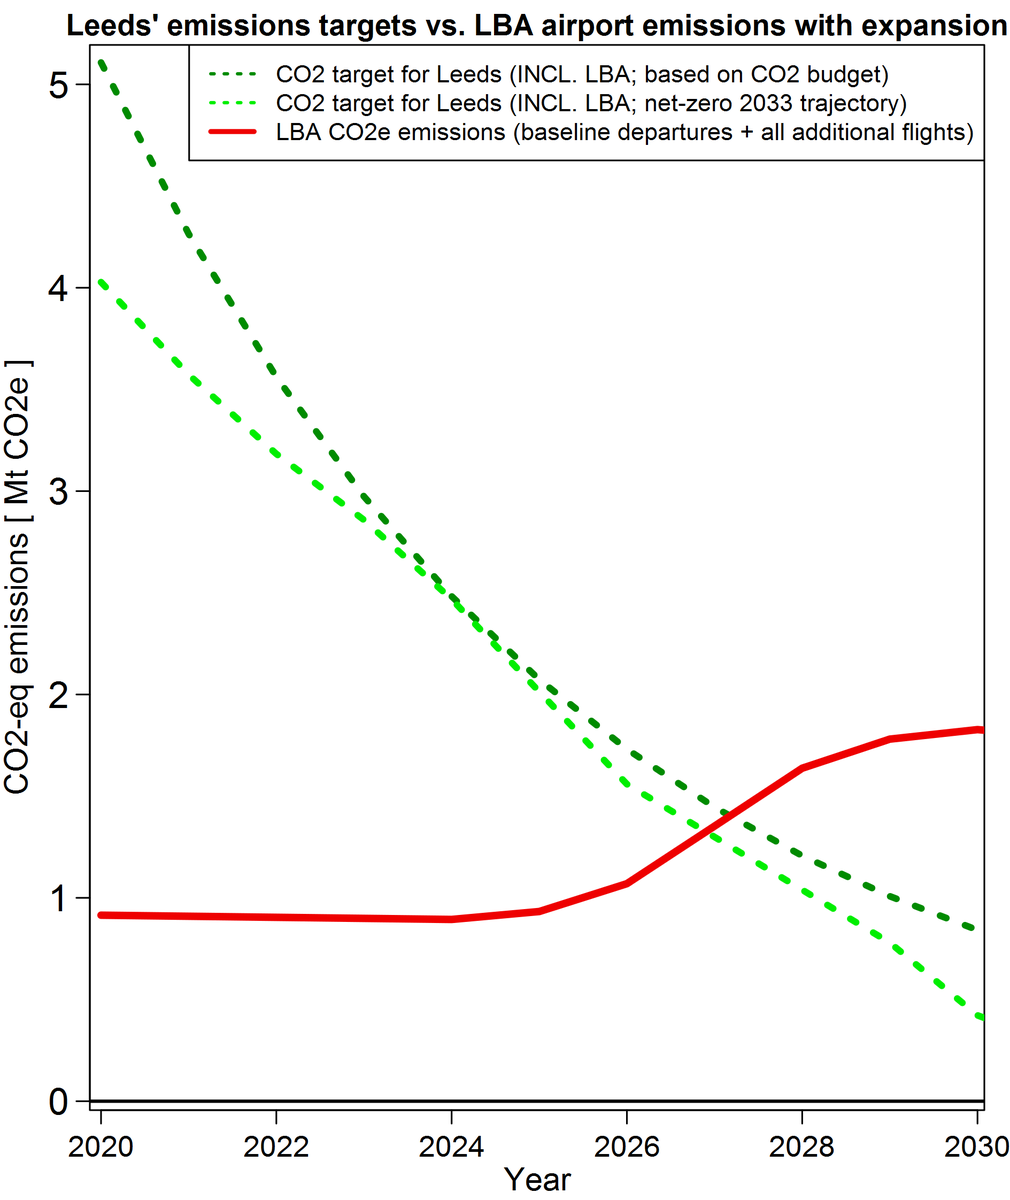 14/ And for those who are not convinced by LBA’s vague post-2030 passenger goals, here is the same graph just for the period until 2030 (when expansion is supposed to be complete and when Leeds is supposed to reach net-zero emissions).